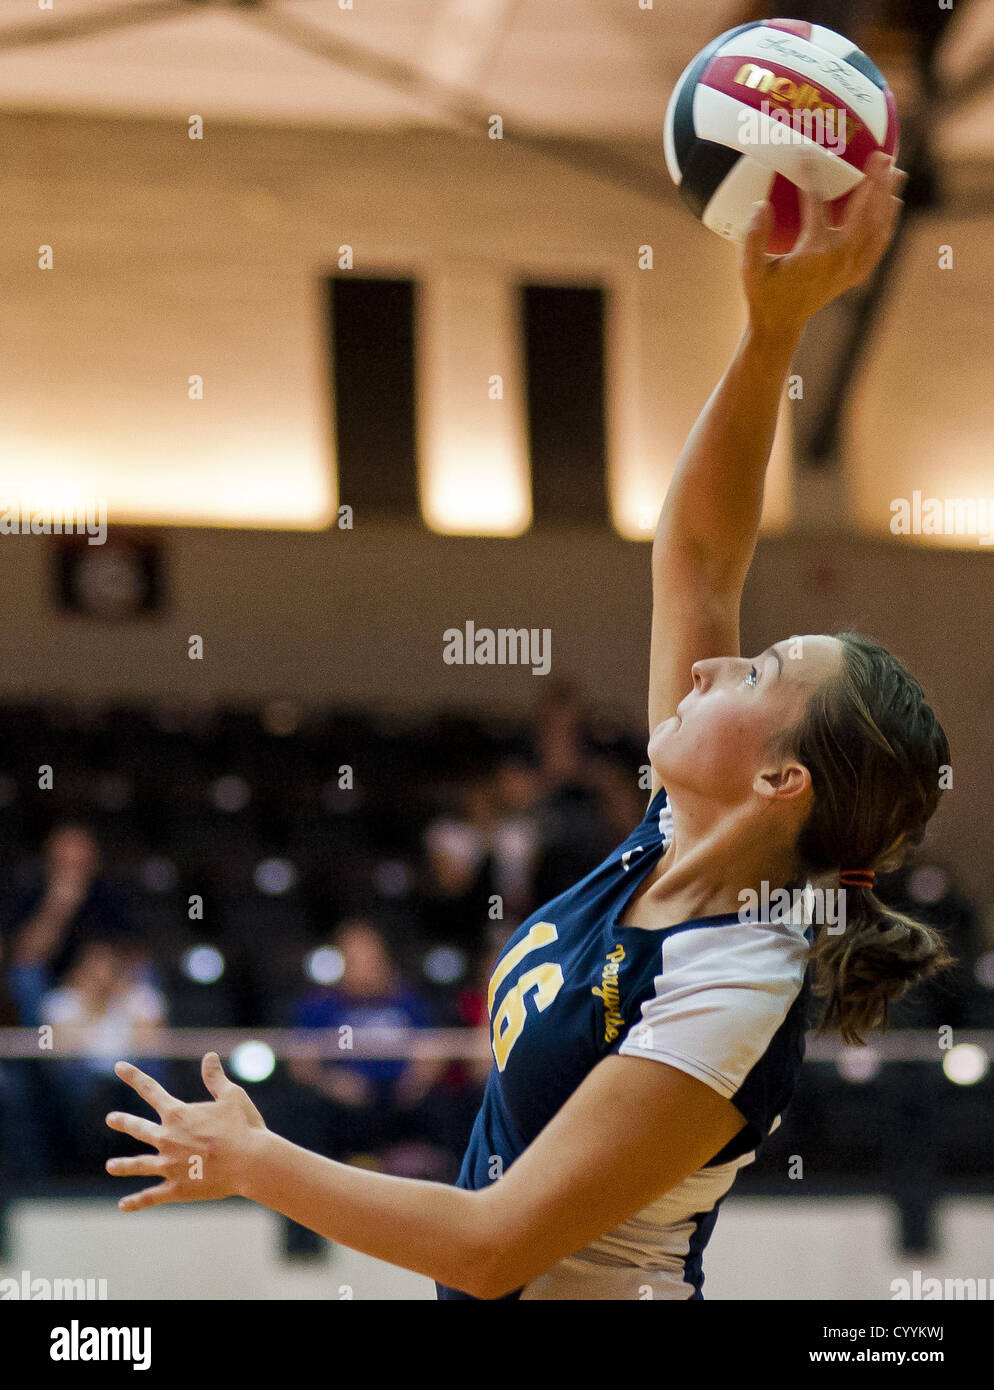 Nov. 12, 2012 - College Park, Maryland, U.S. - Perryville's Marissa Phillips tries a kill shot during the Perryville High School versus Dunbar High School match in the Semifinals of the Maryland State Volleyball 1A Championship at Ritchie Coliseum in College Park, Maryland on November 12, 2012. Perryville defeated Dunbar 25-21, 25-7 and 25-22 in straights sets to earn a rematch with Smithsburg for the State 1A Title. (Credit Image: © Scott Serio/Eclipse/ZUMAPRESS.com) Stock Photo